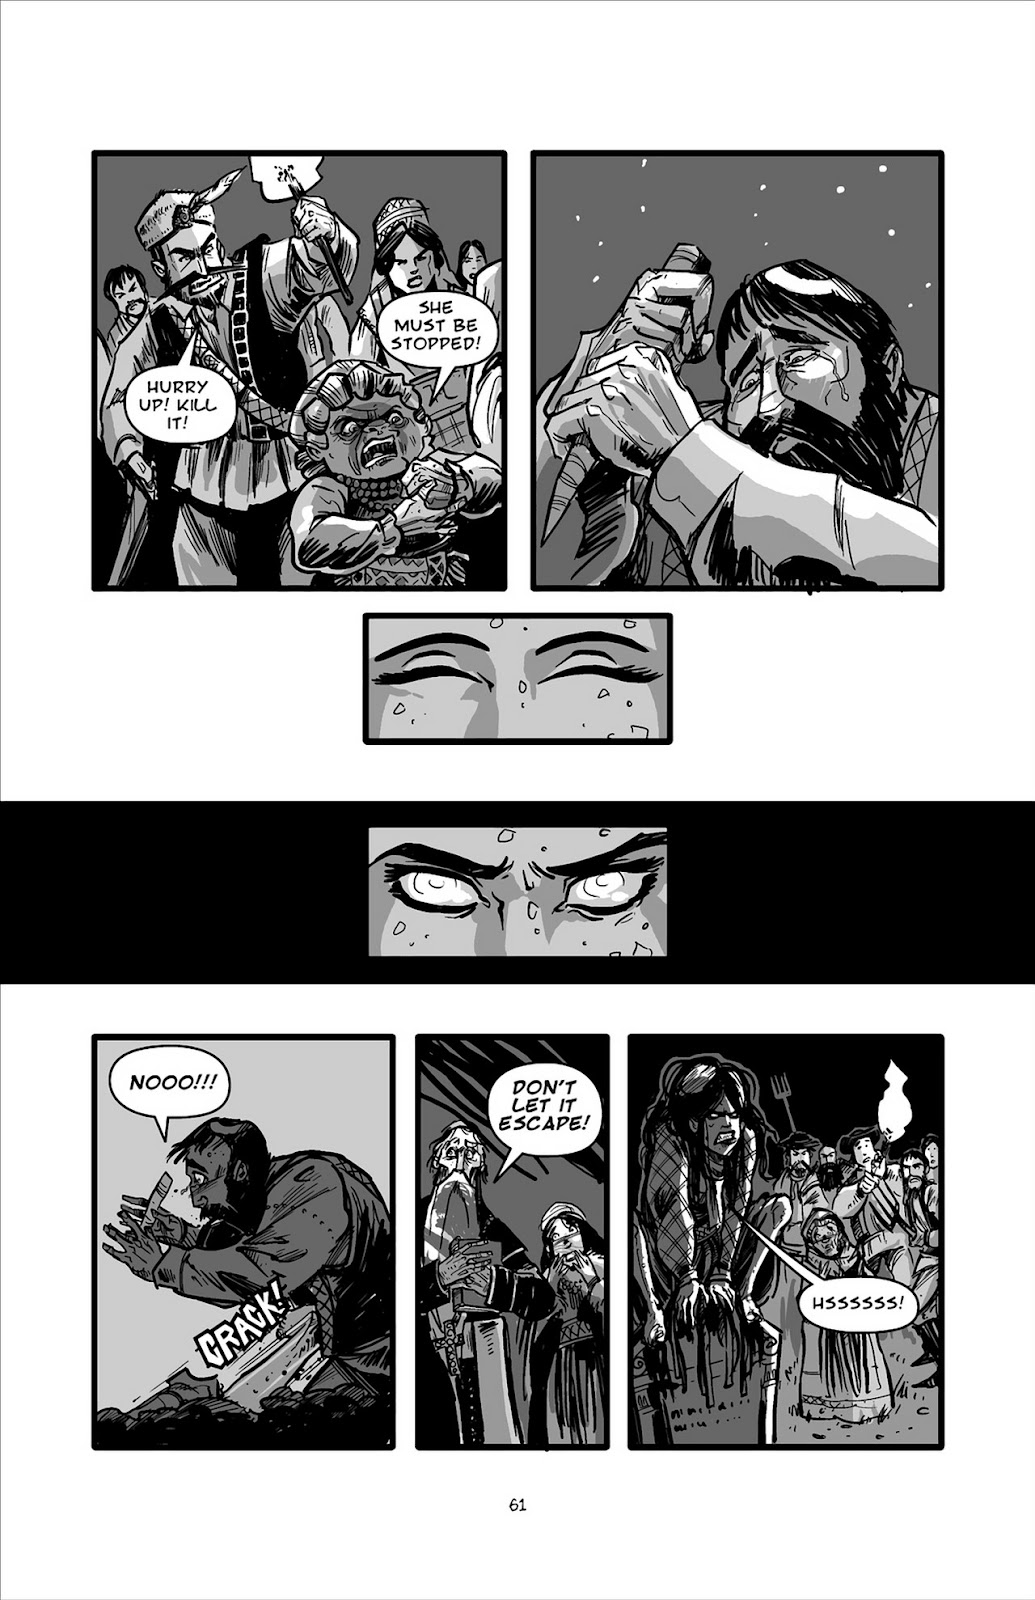 Pinocchio: Vampire Slayer - Of Wood and Blood issue 3 - Page 12